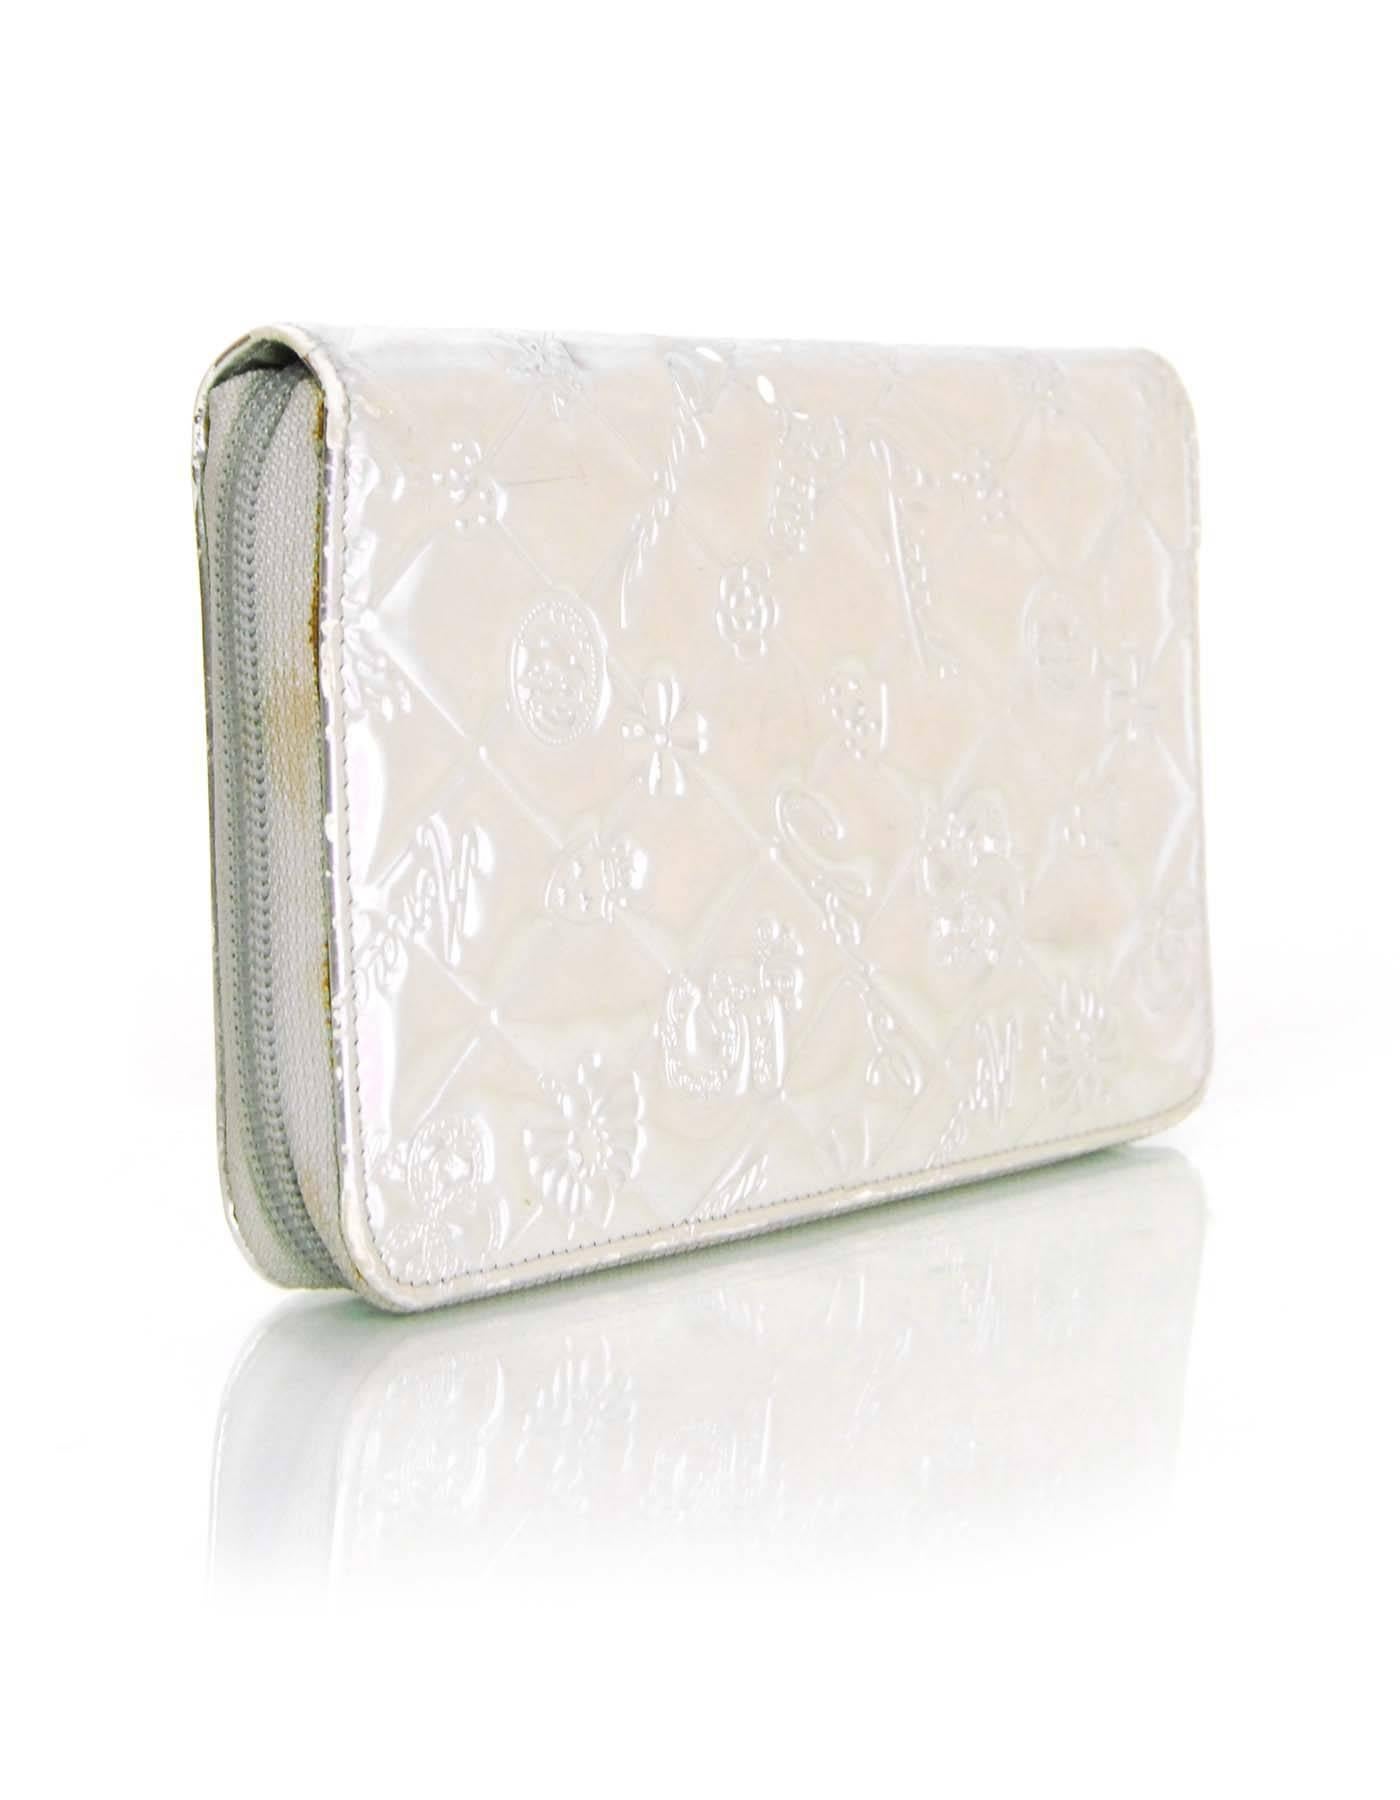 Chanel Silver Mirror Icons Zip Around XL Wallet
Features embossed design throughout

Made In: Italy
Year of Production: 2006-2008
Color: Silver
Hardware: Silvertone
Materials: Leather
Lining: Silver leather
Closure/Opening: Zip around